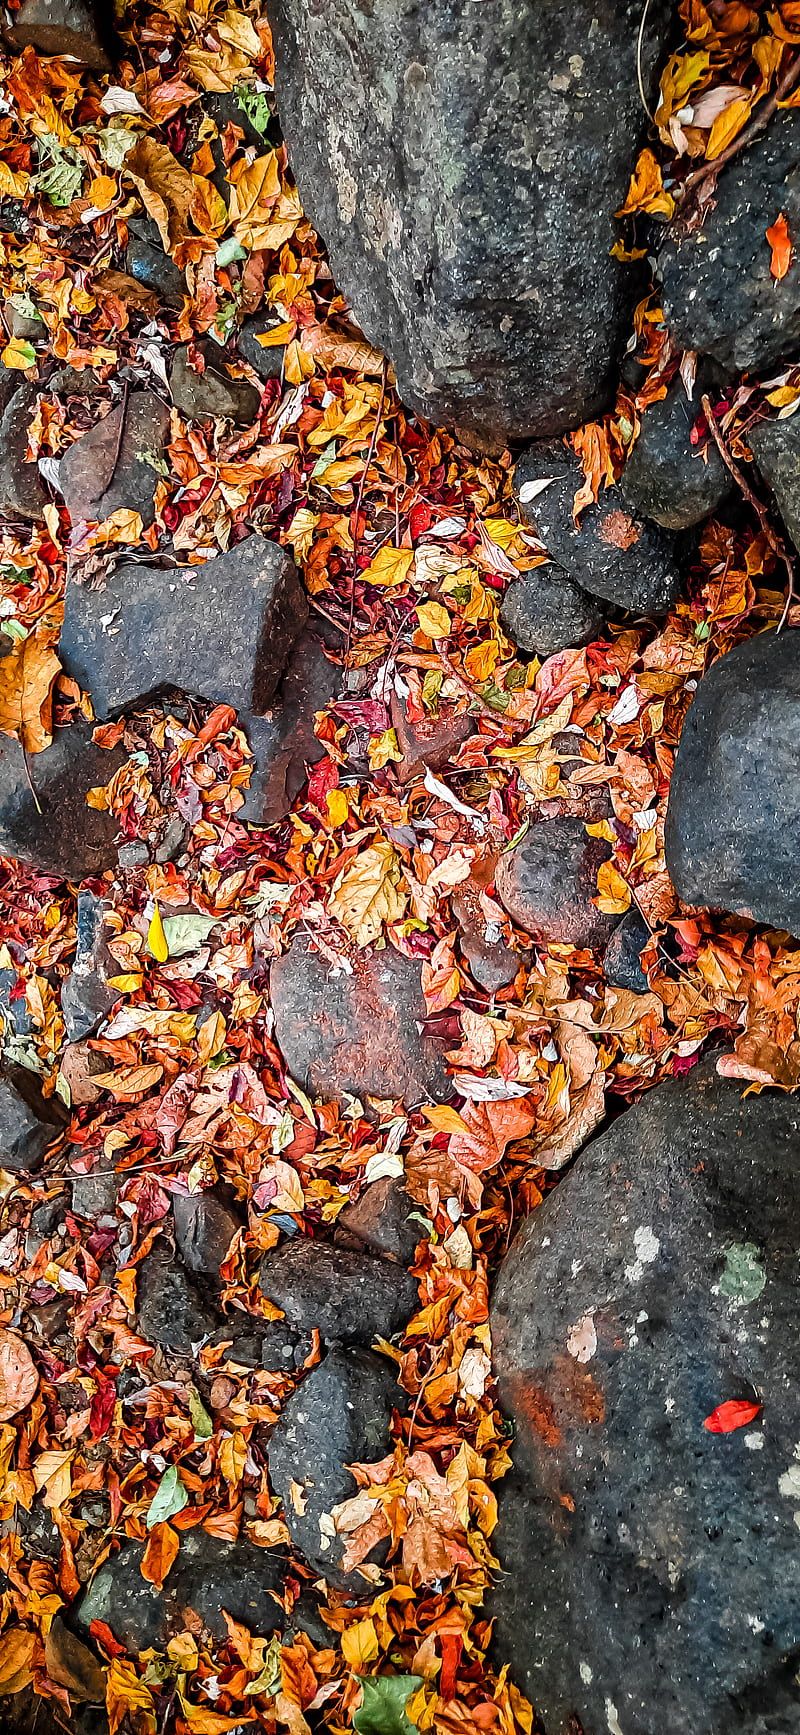 A stone walkway with colorful leaves covering the stones - Vintage fall